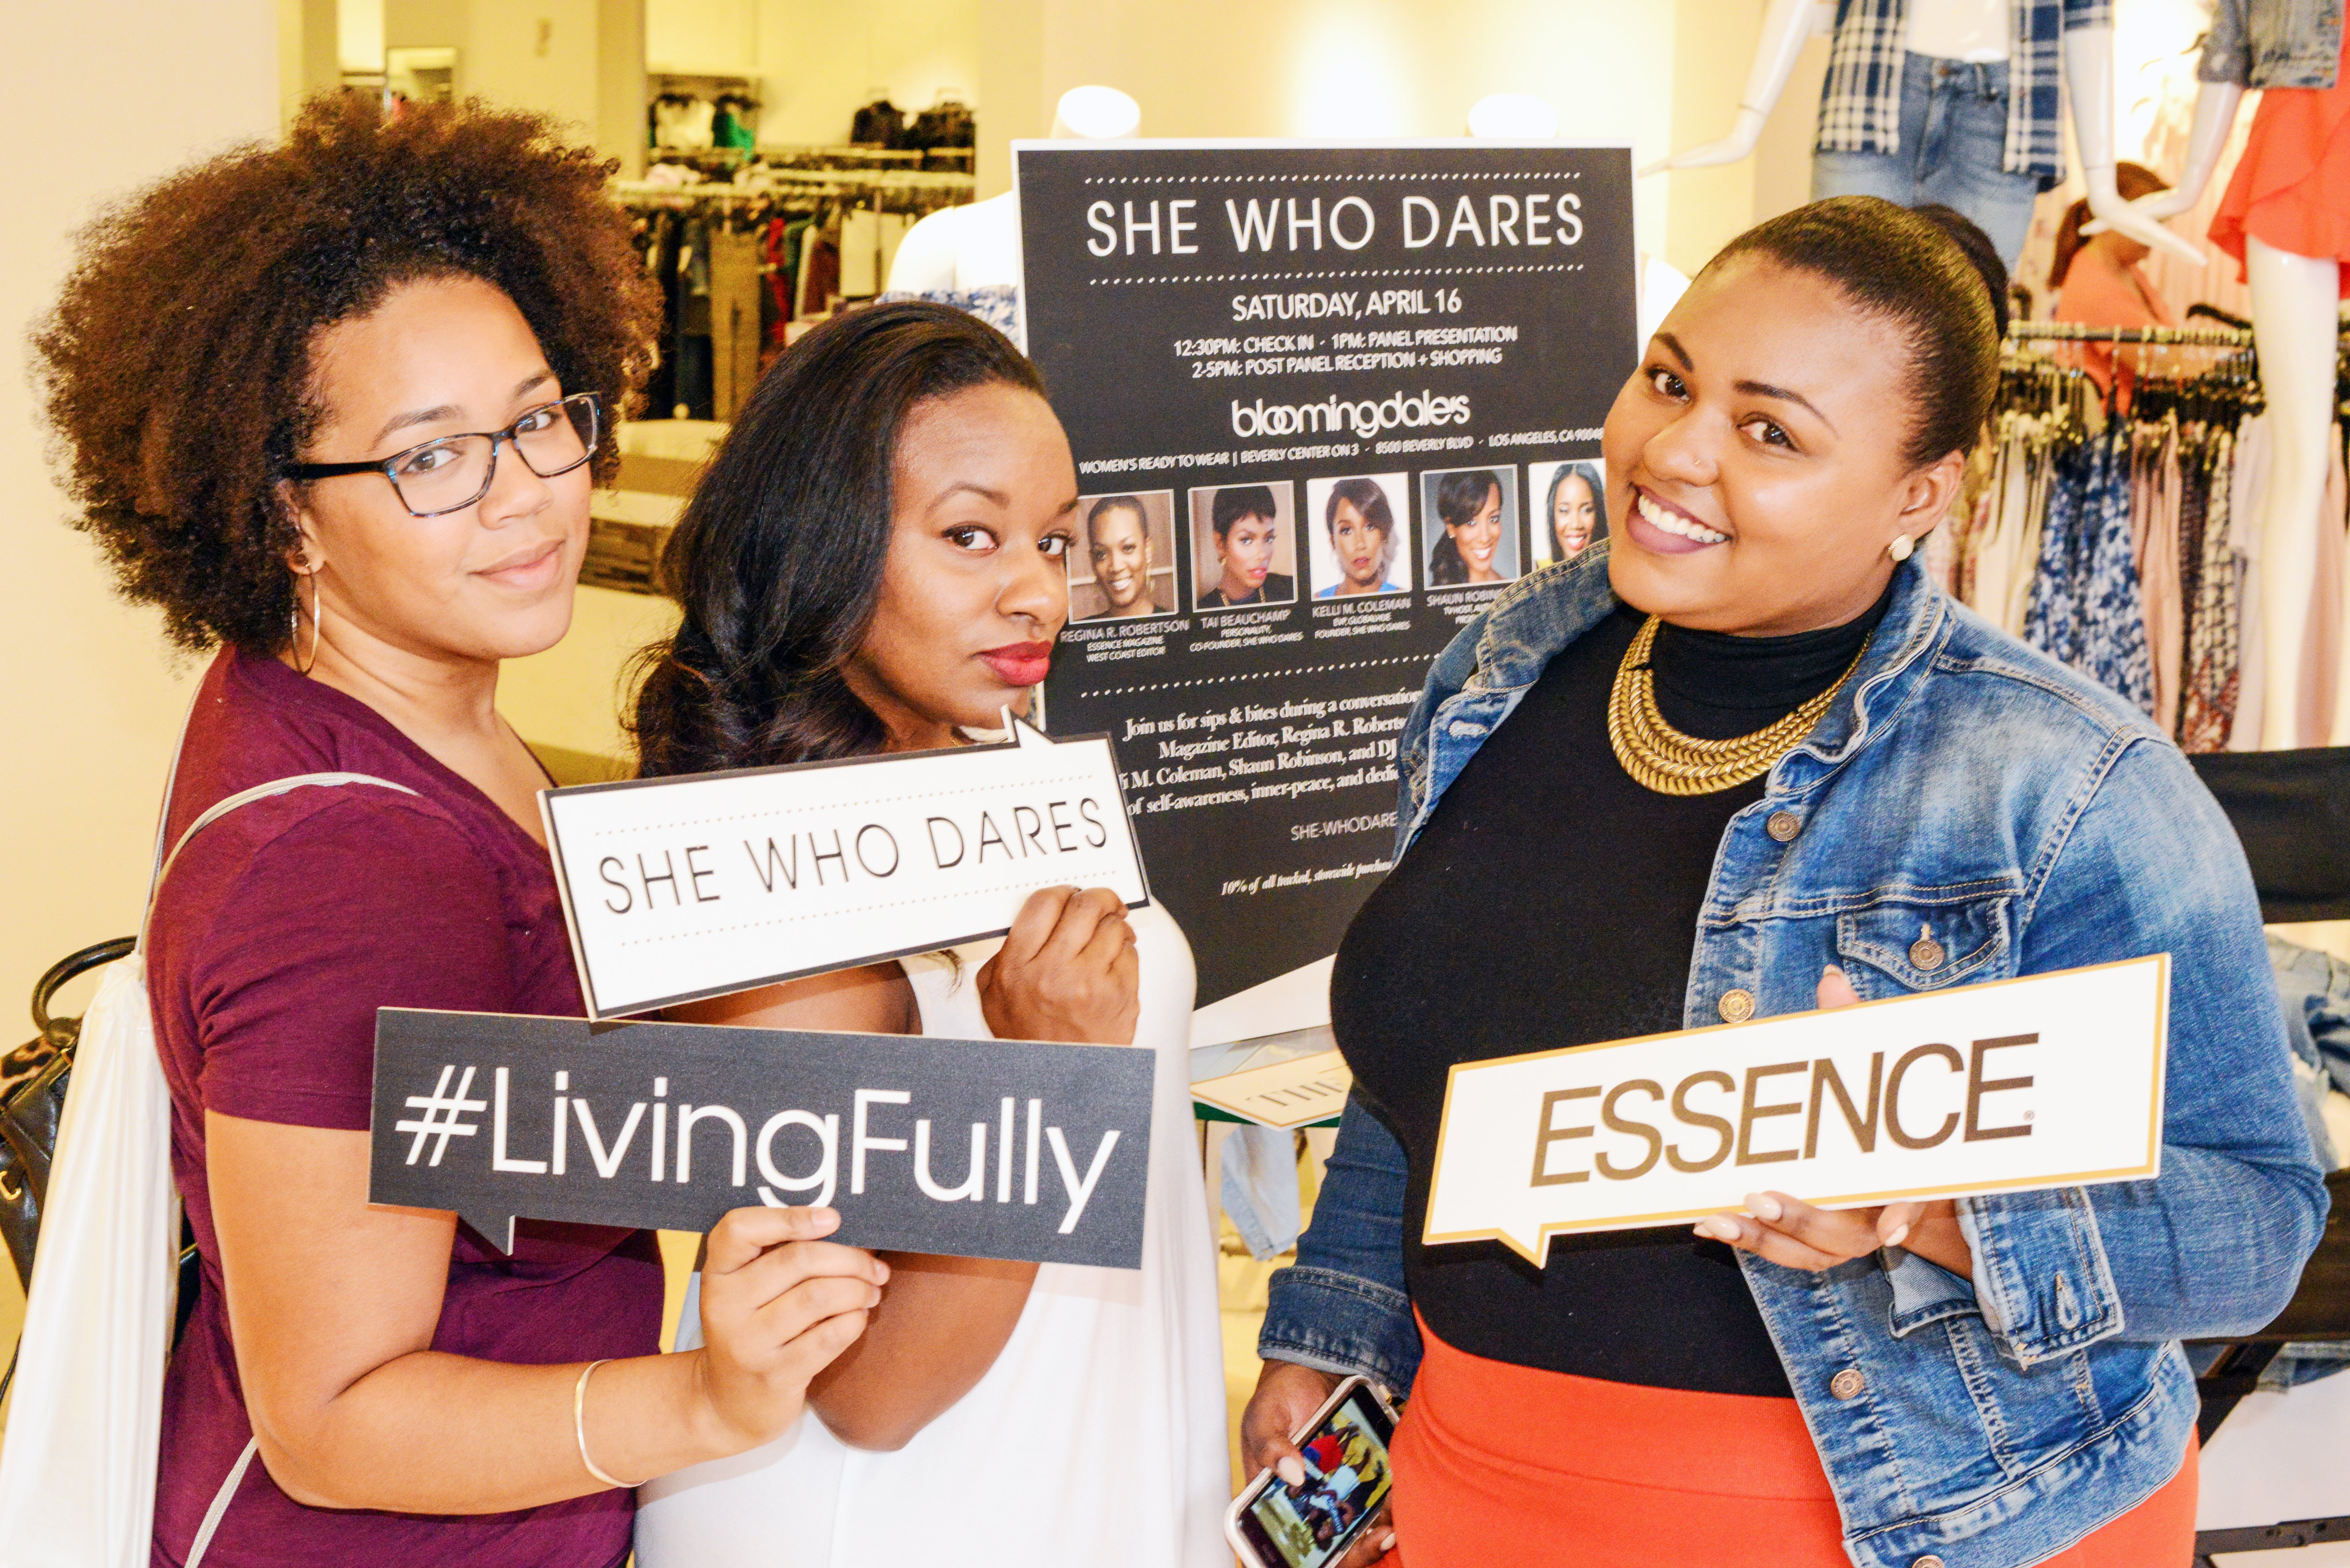 Take a Look Inside The ESSENCE x She Who Dares & WEEN Event in Los Angeles
